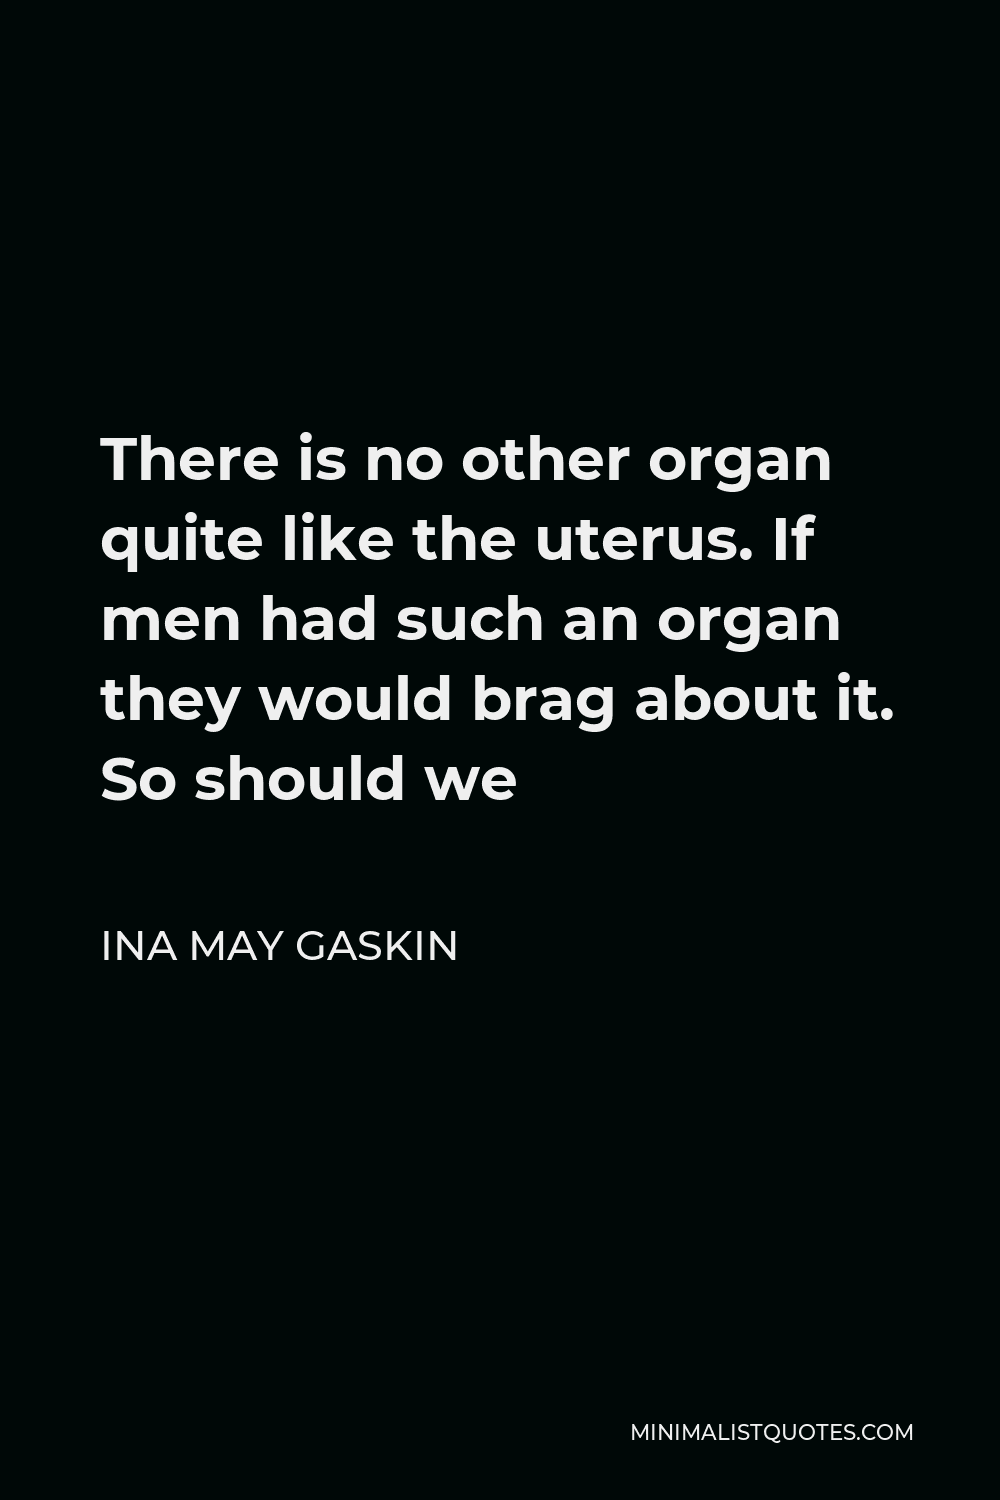 Ina May Gaskin Quote - There is no other organ quite like the uterus. If men had such an organ they would brag about it. So should we